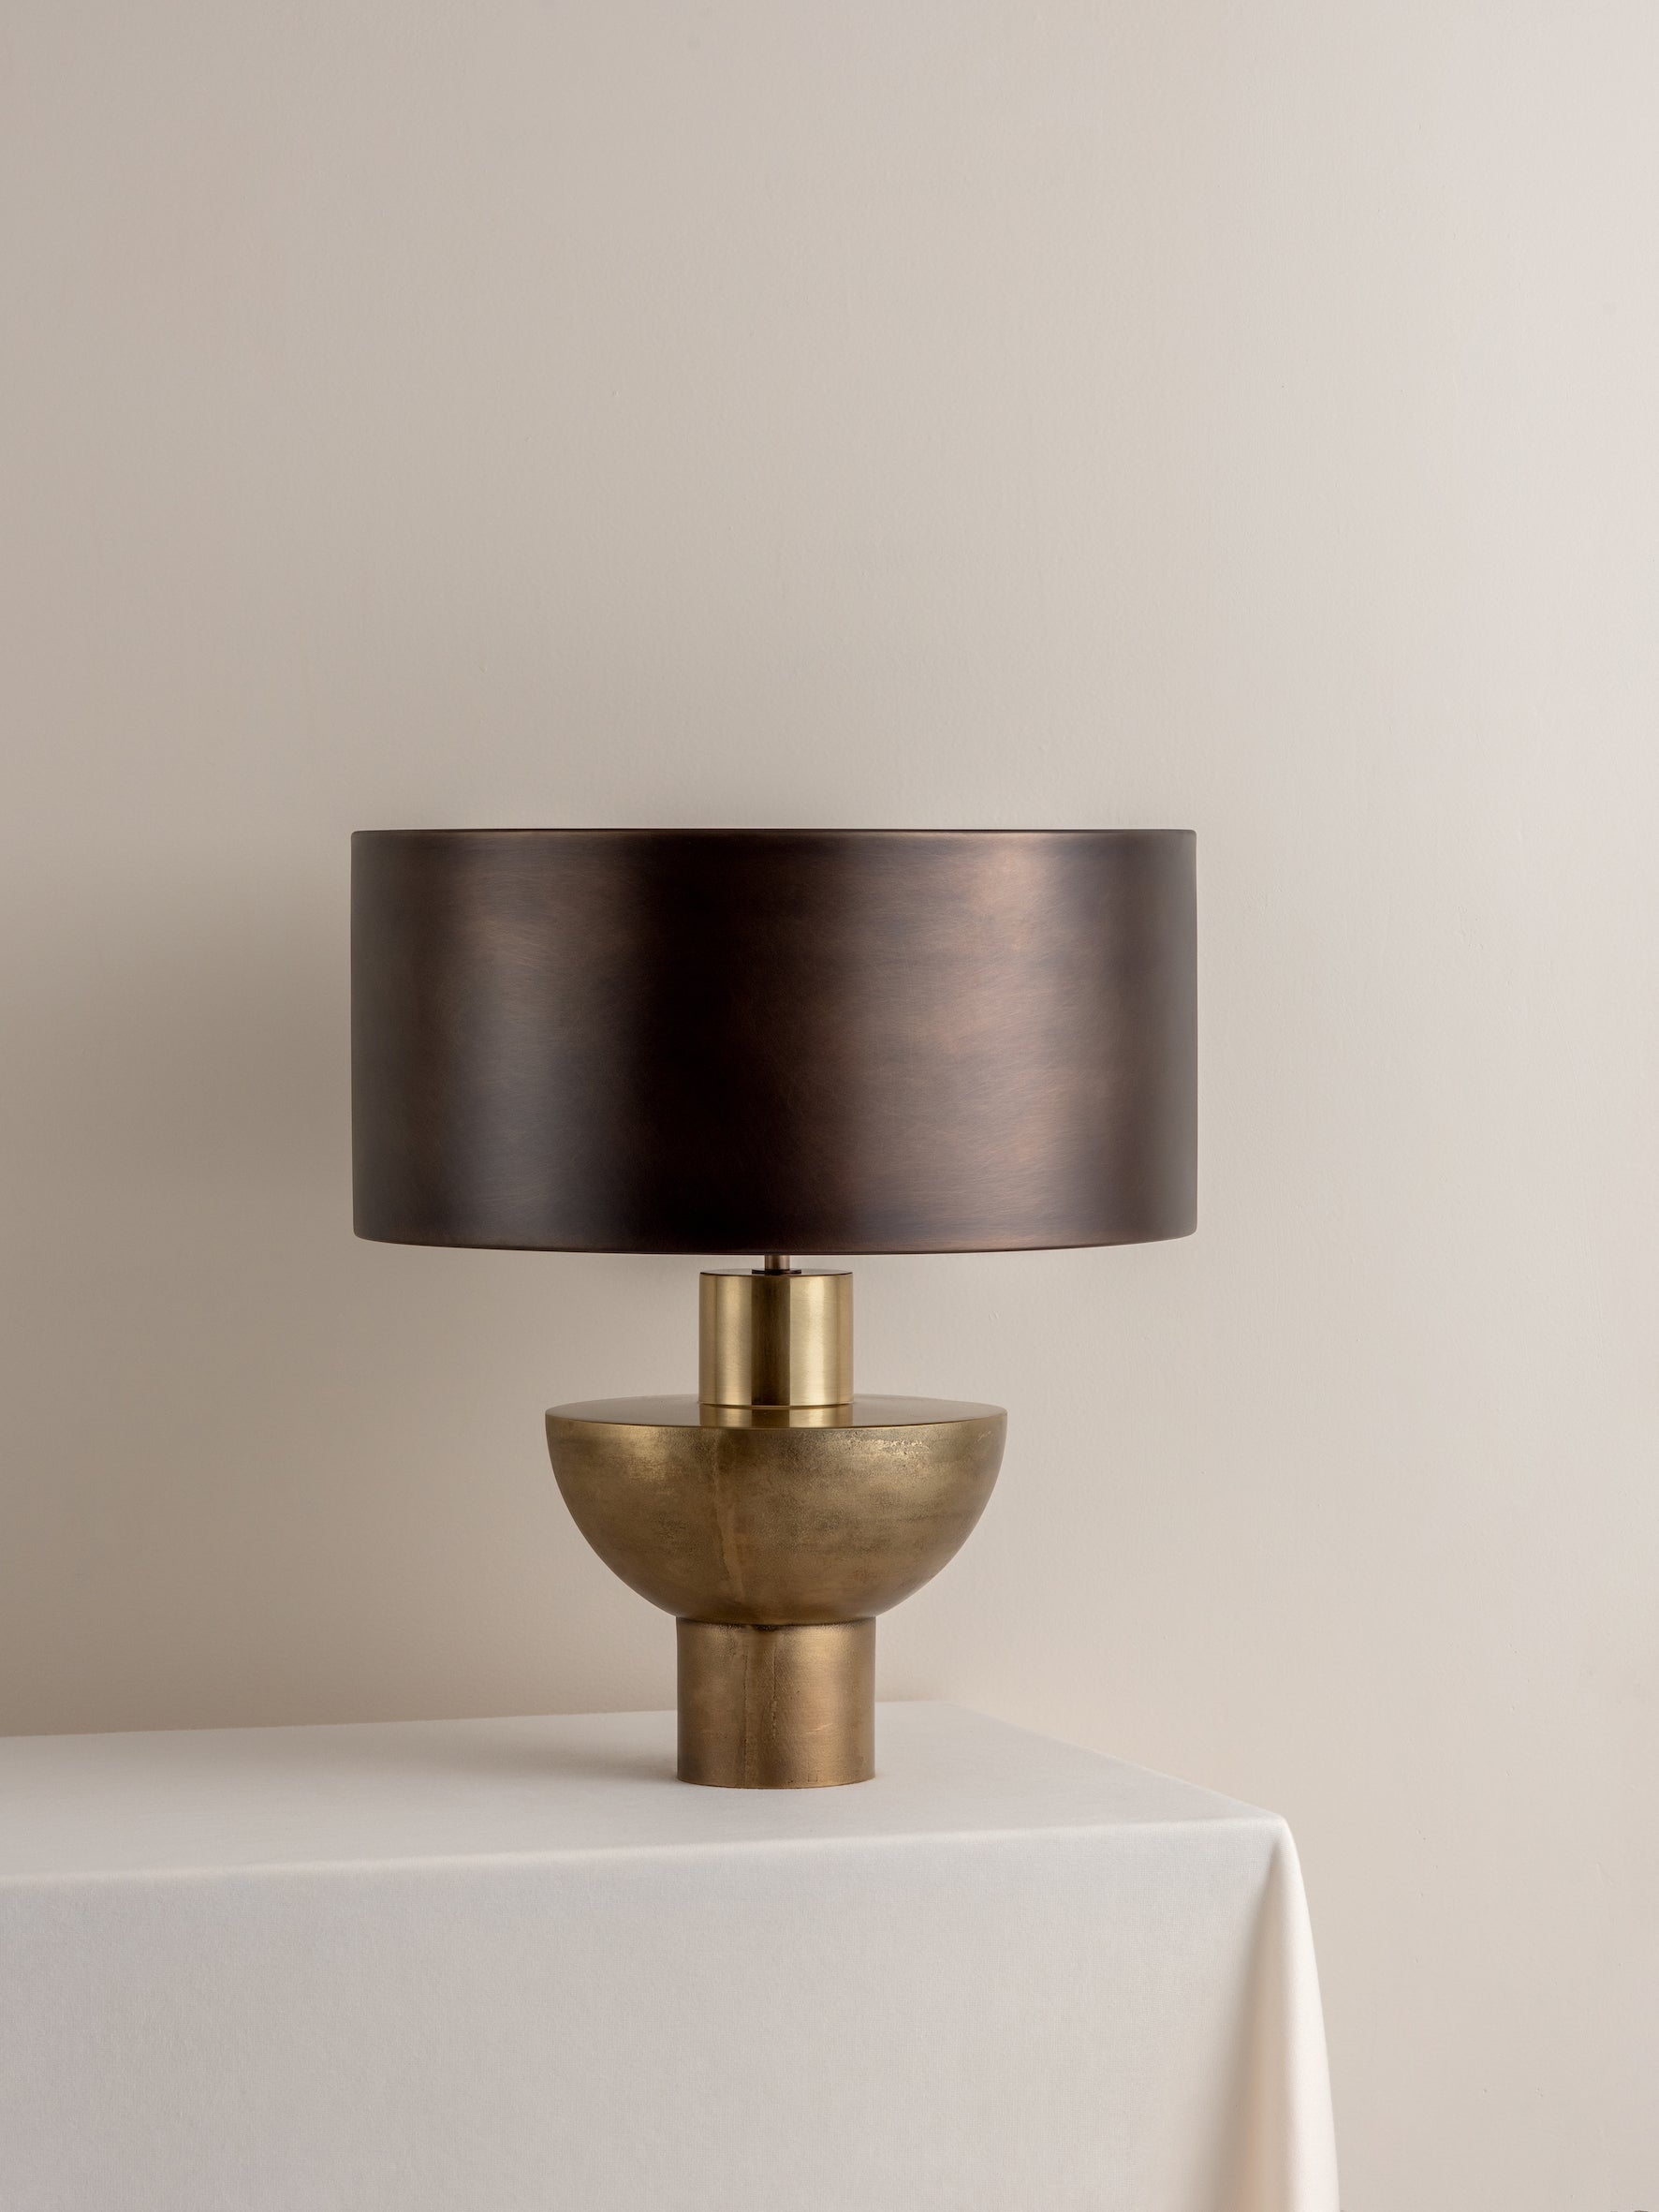 Editions brass lamp with + bronze shade | Table Lamp | Lights & Lamps Inc | Modern Affordable Designer Lighting | USA